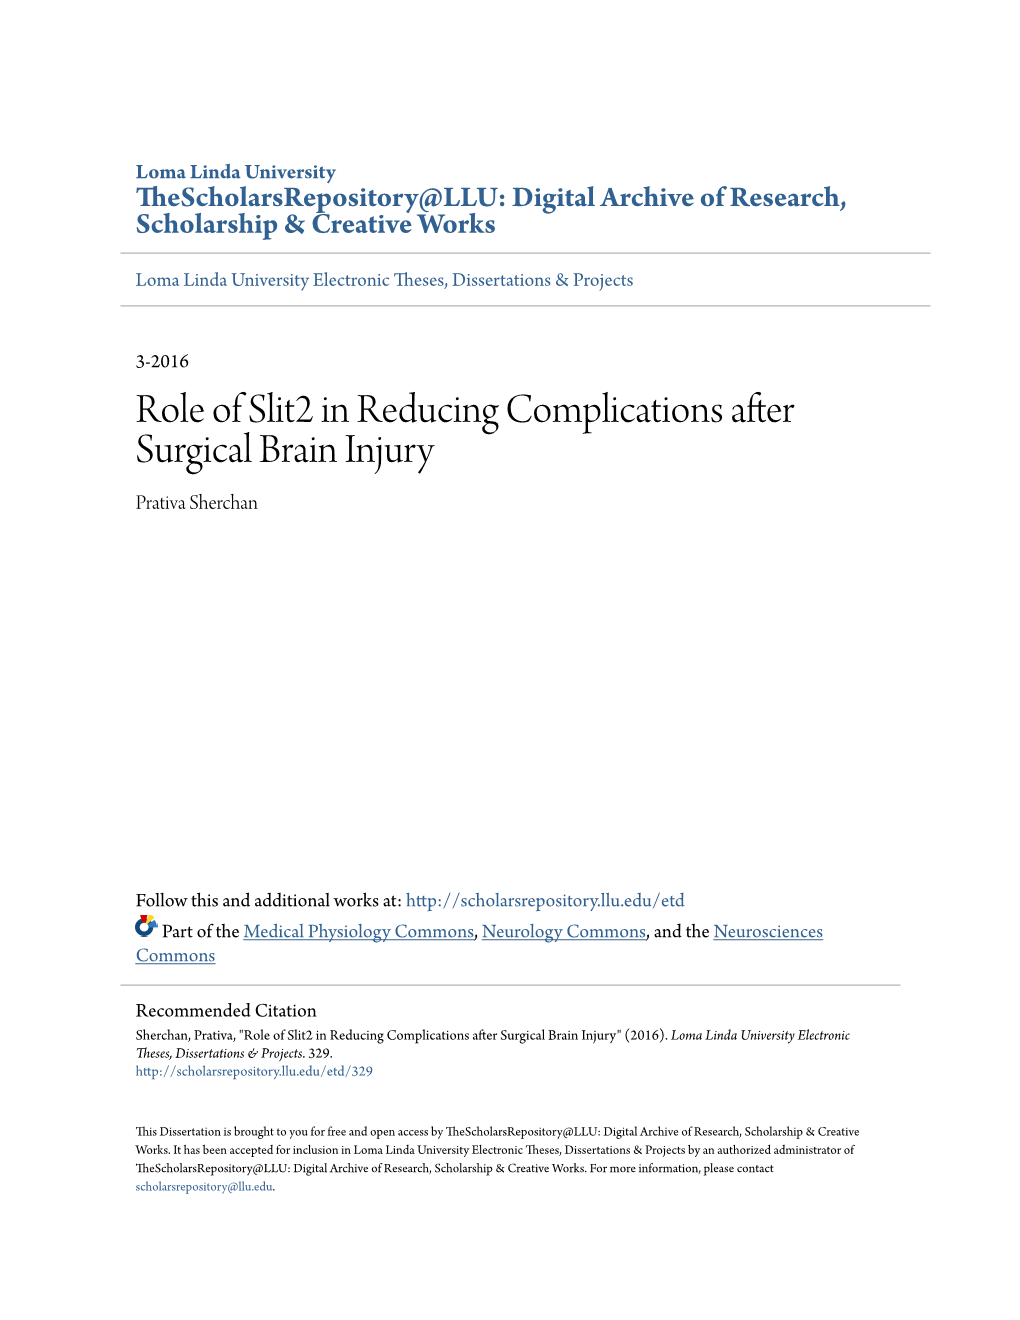 Role of Slit2 in Reducing Complications After Surgical Brain Injury Prativa Sherchan